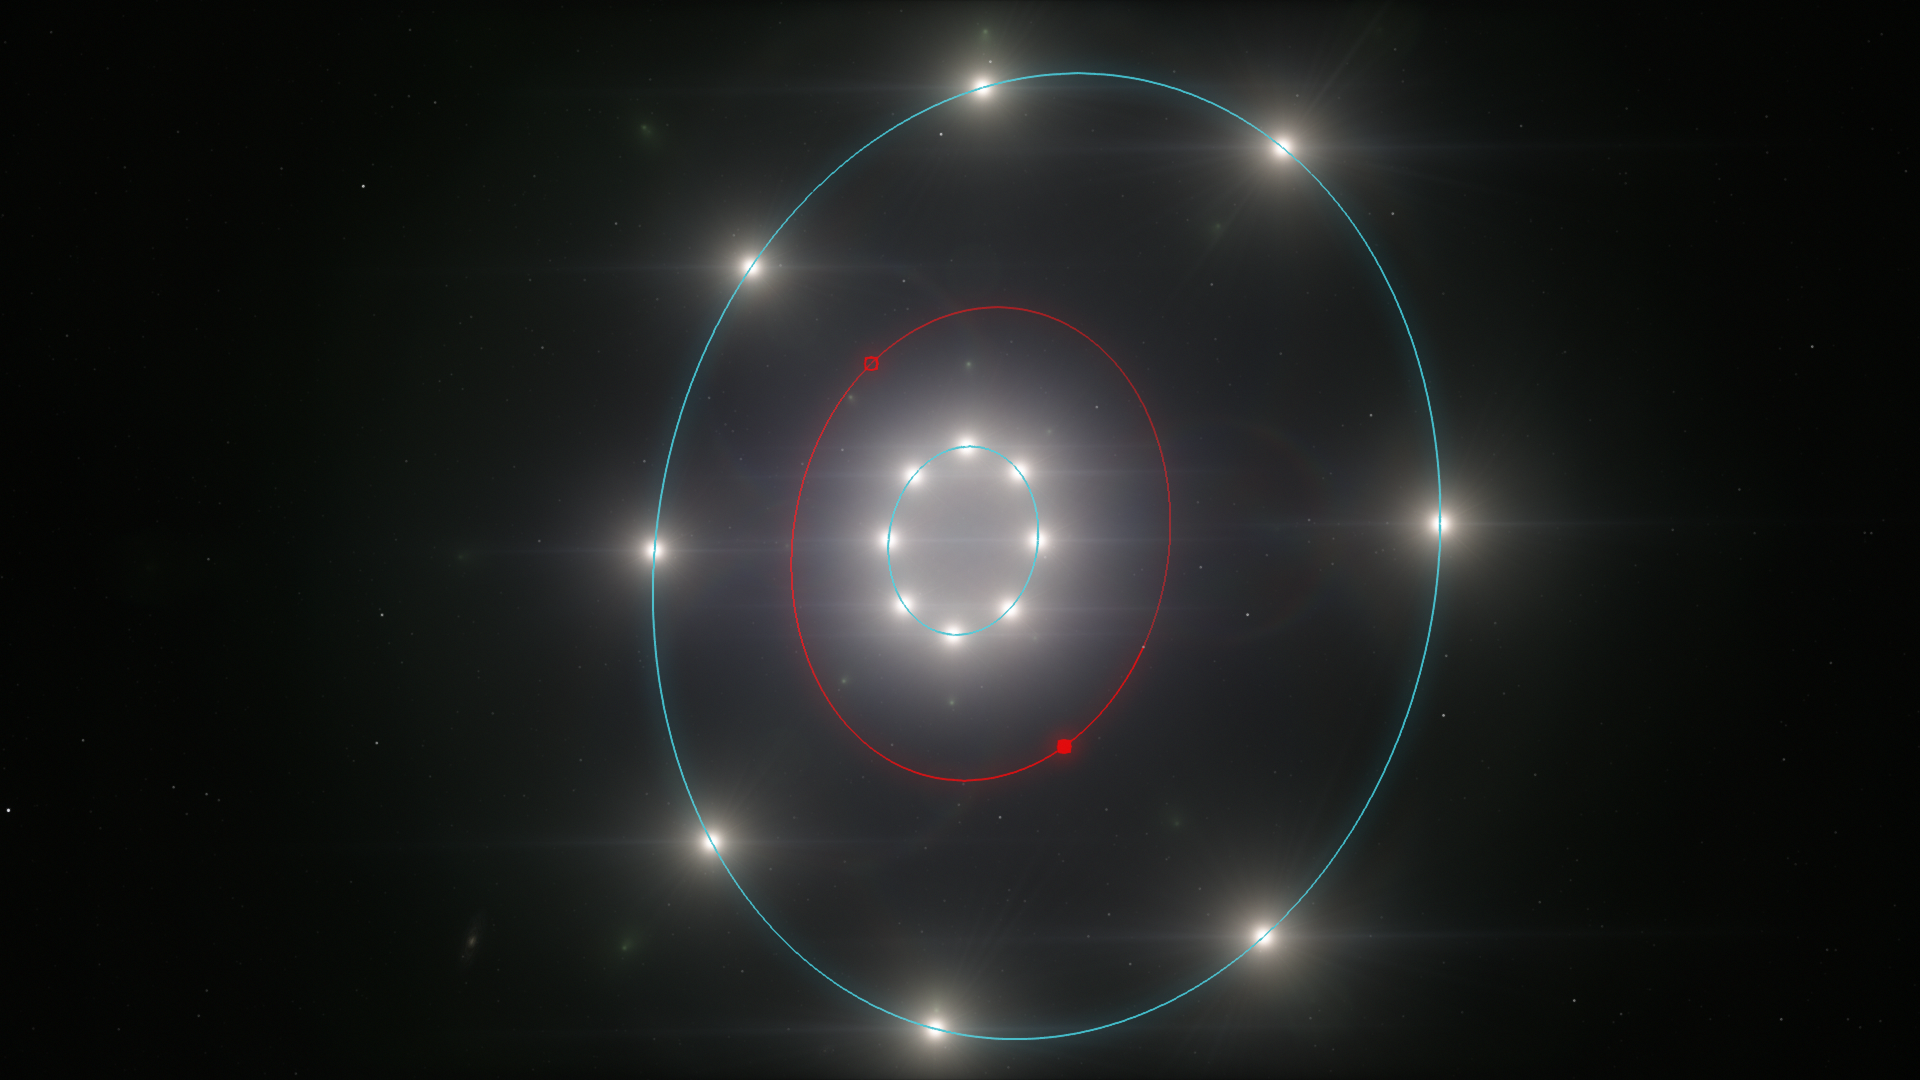 The Kalgash 4 system, with two rings of suns orbiting a black hole, and the Kalgash planet between them.